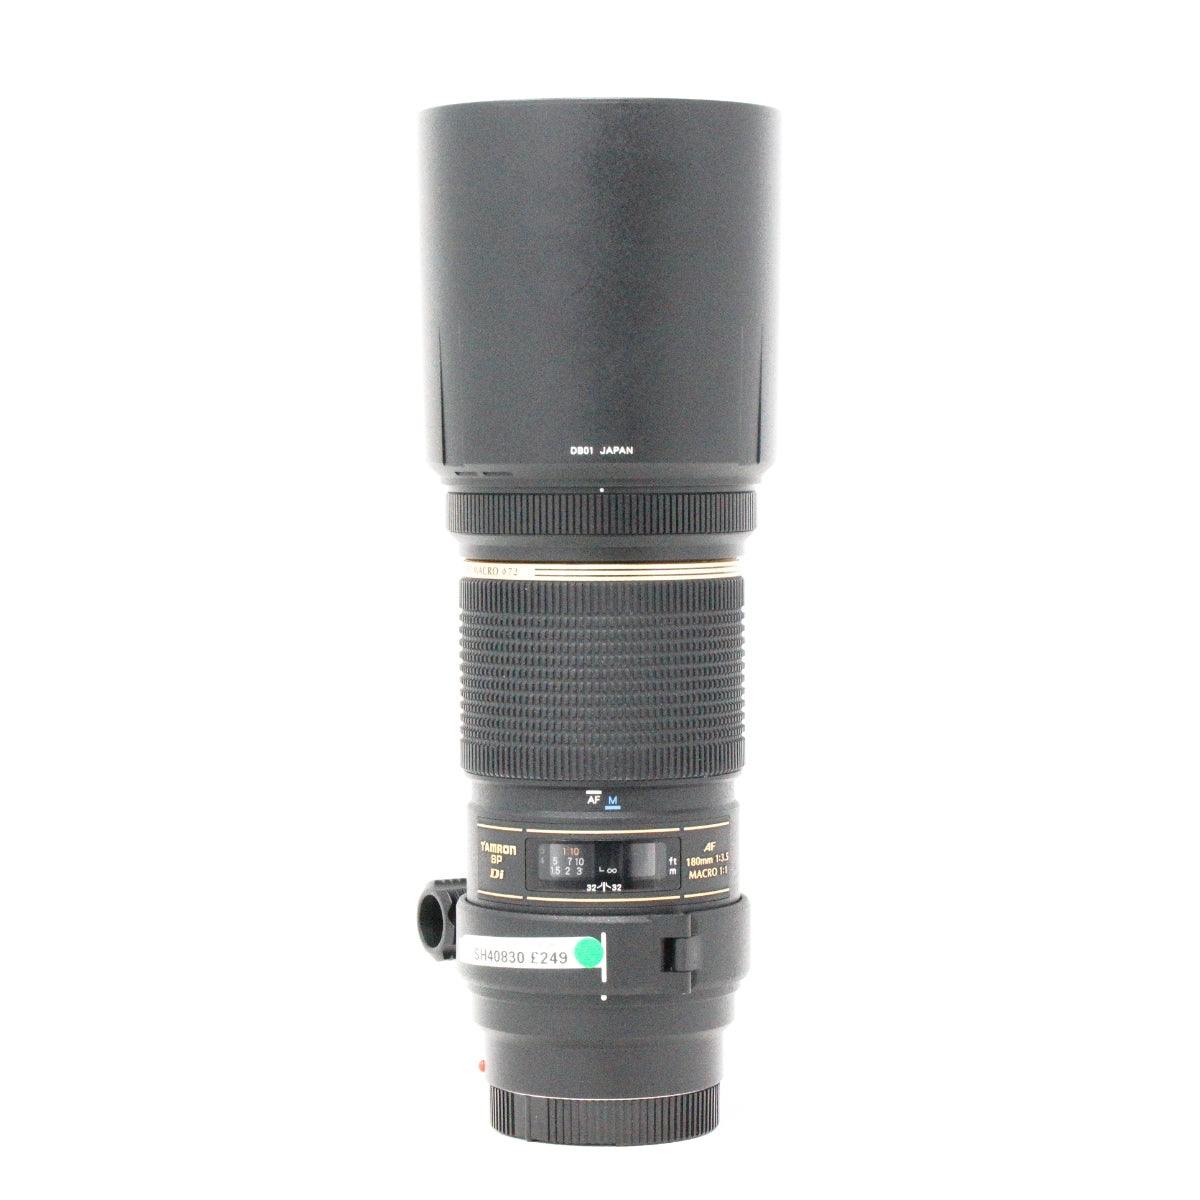 Used Tamron SP 180MM F3.5 Macro DI LD Lens for Sony Alpha